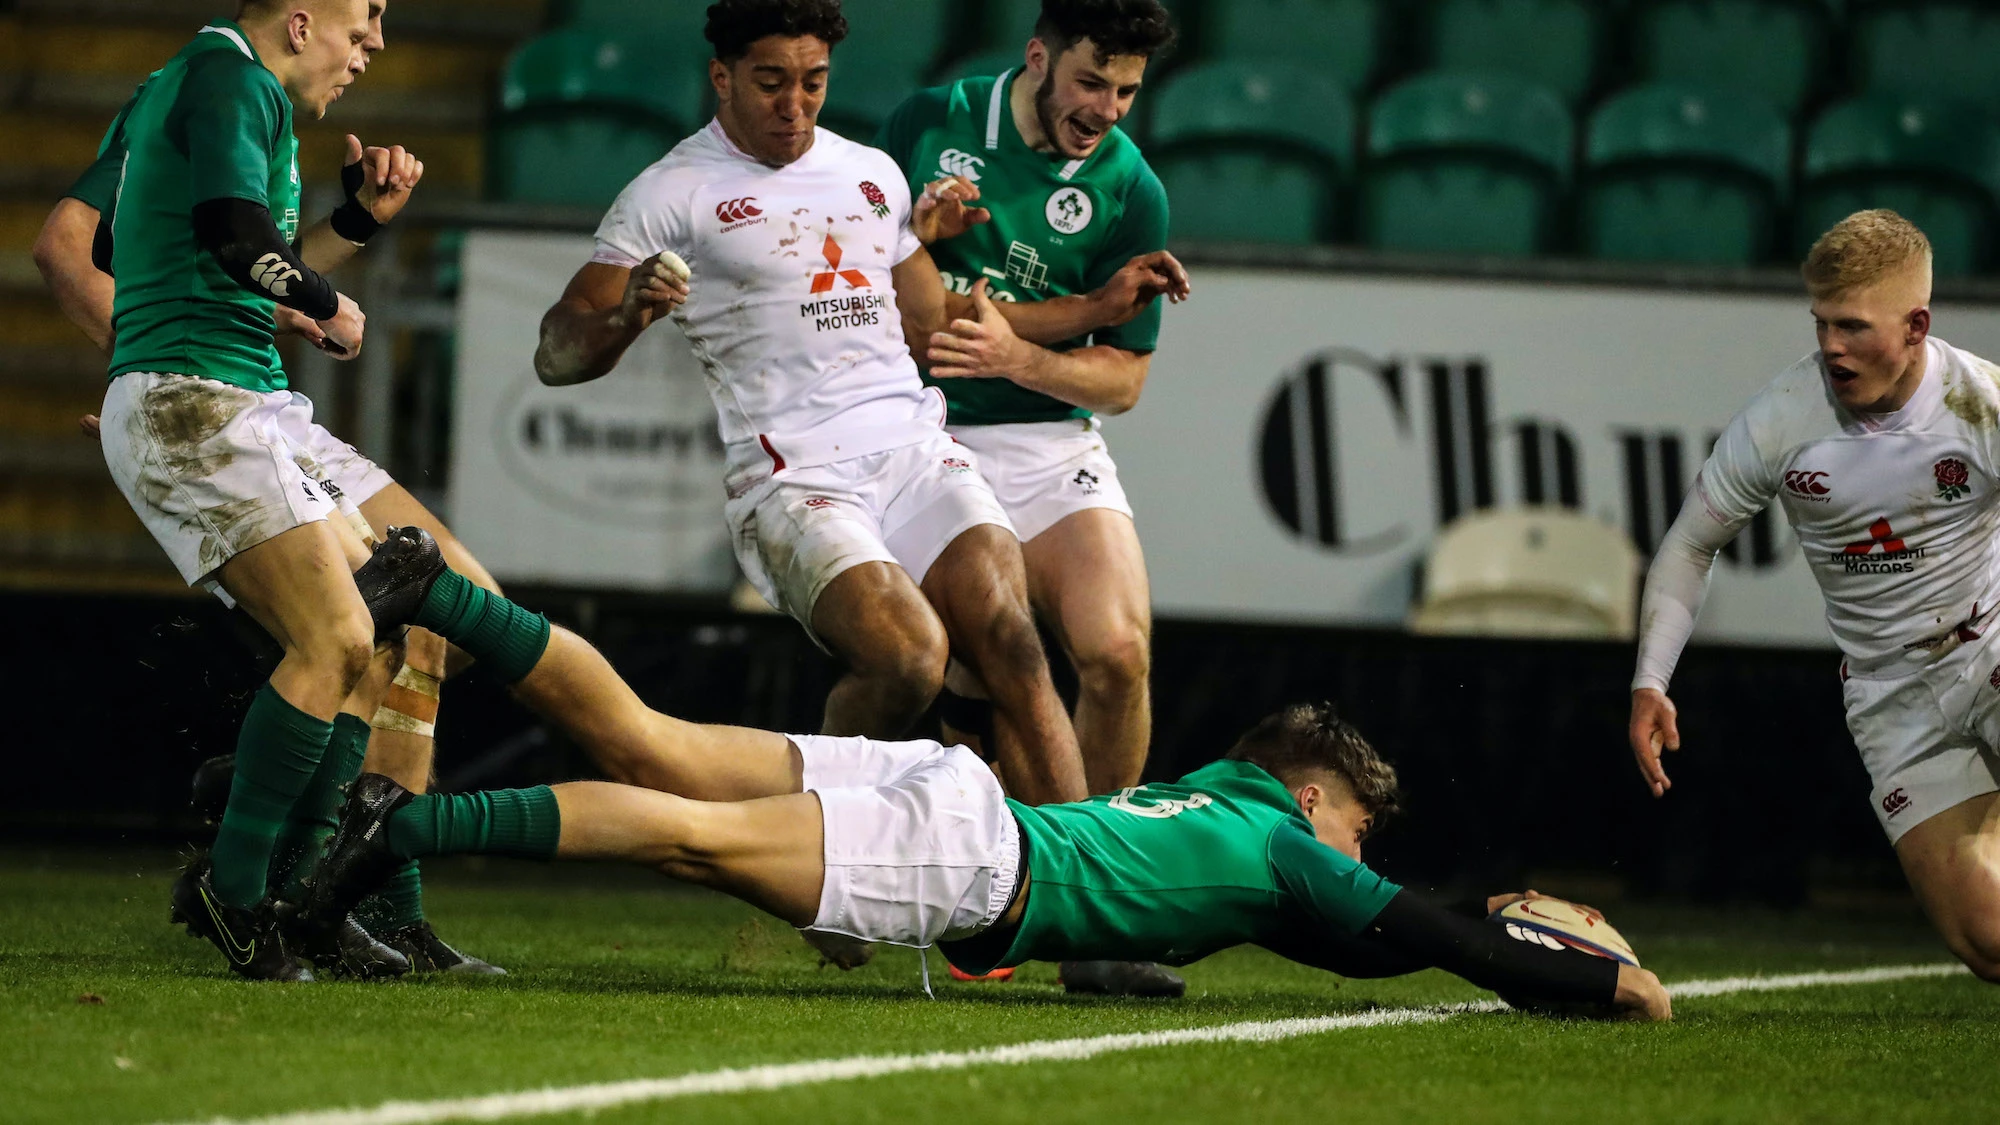 Ireland&#8217;s Max O’Reilly scores a try 21/2/2020